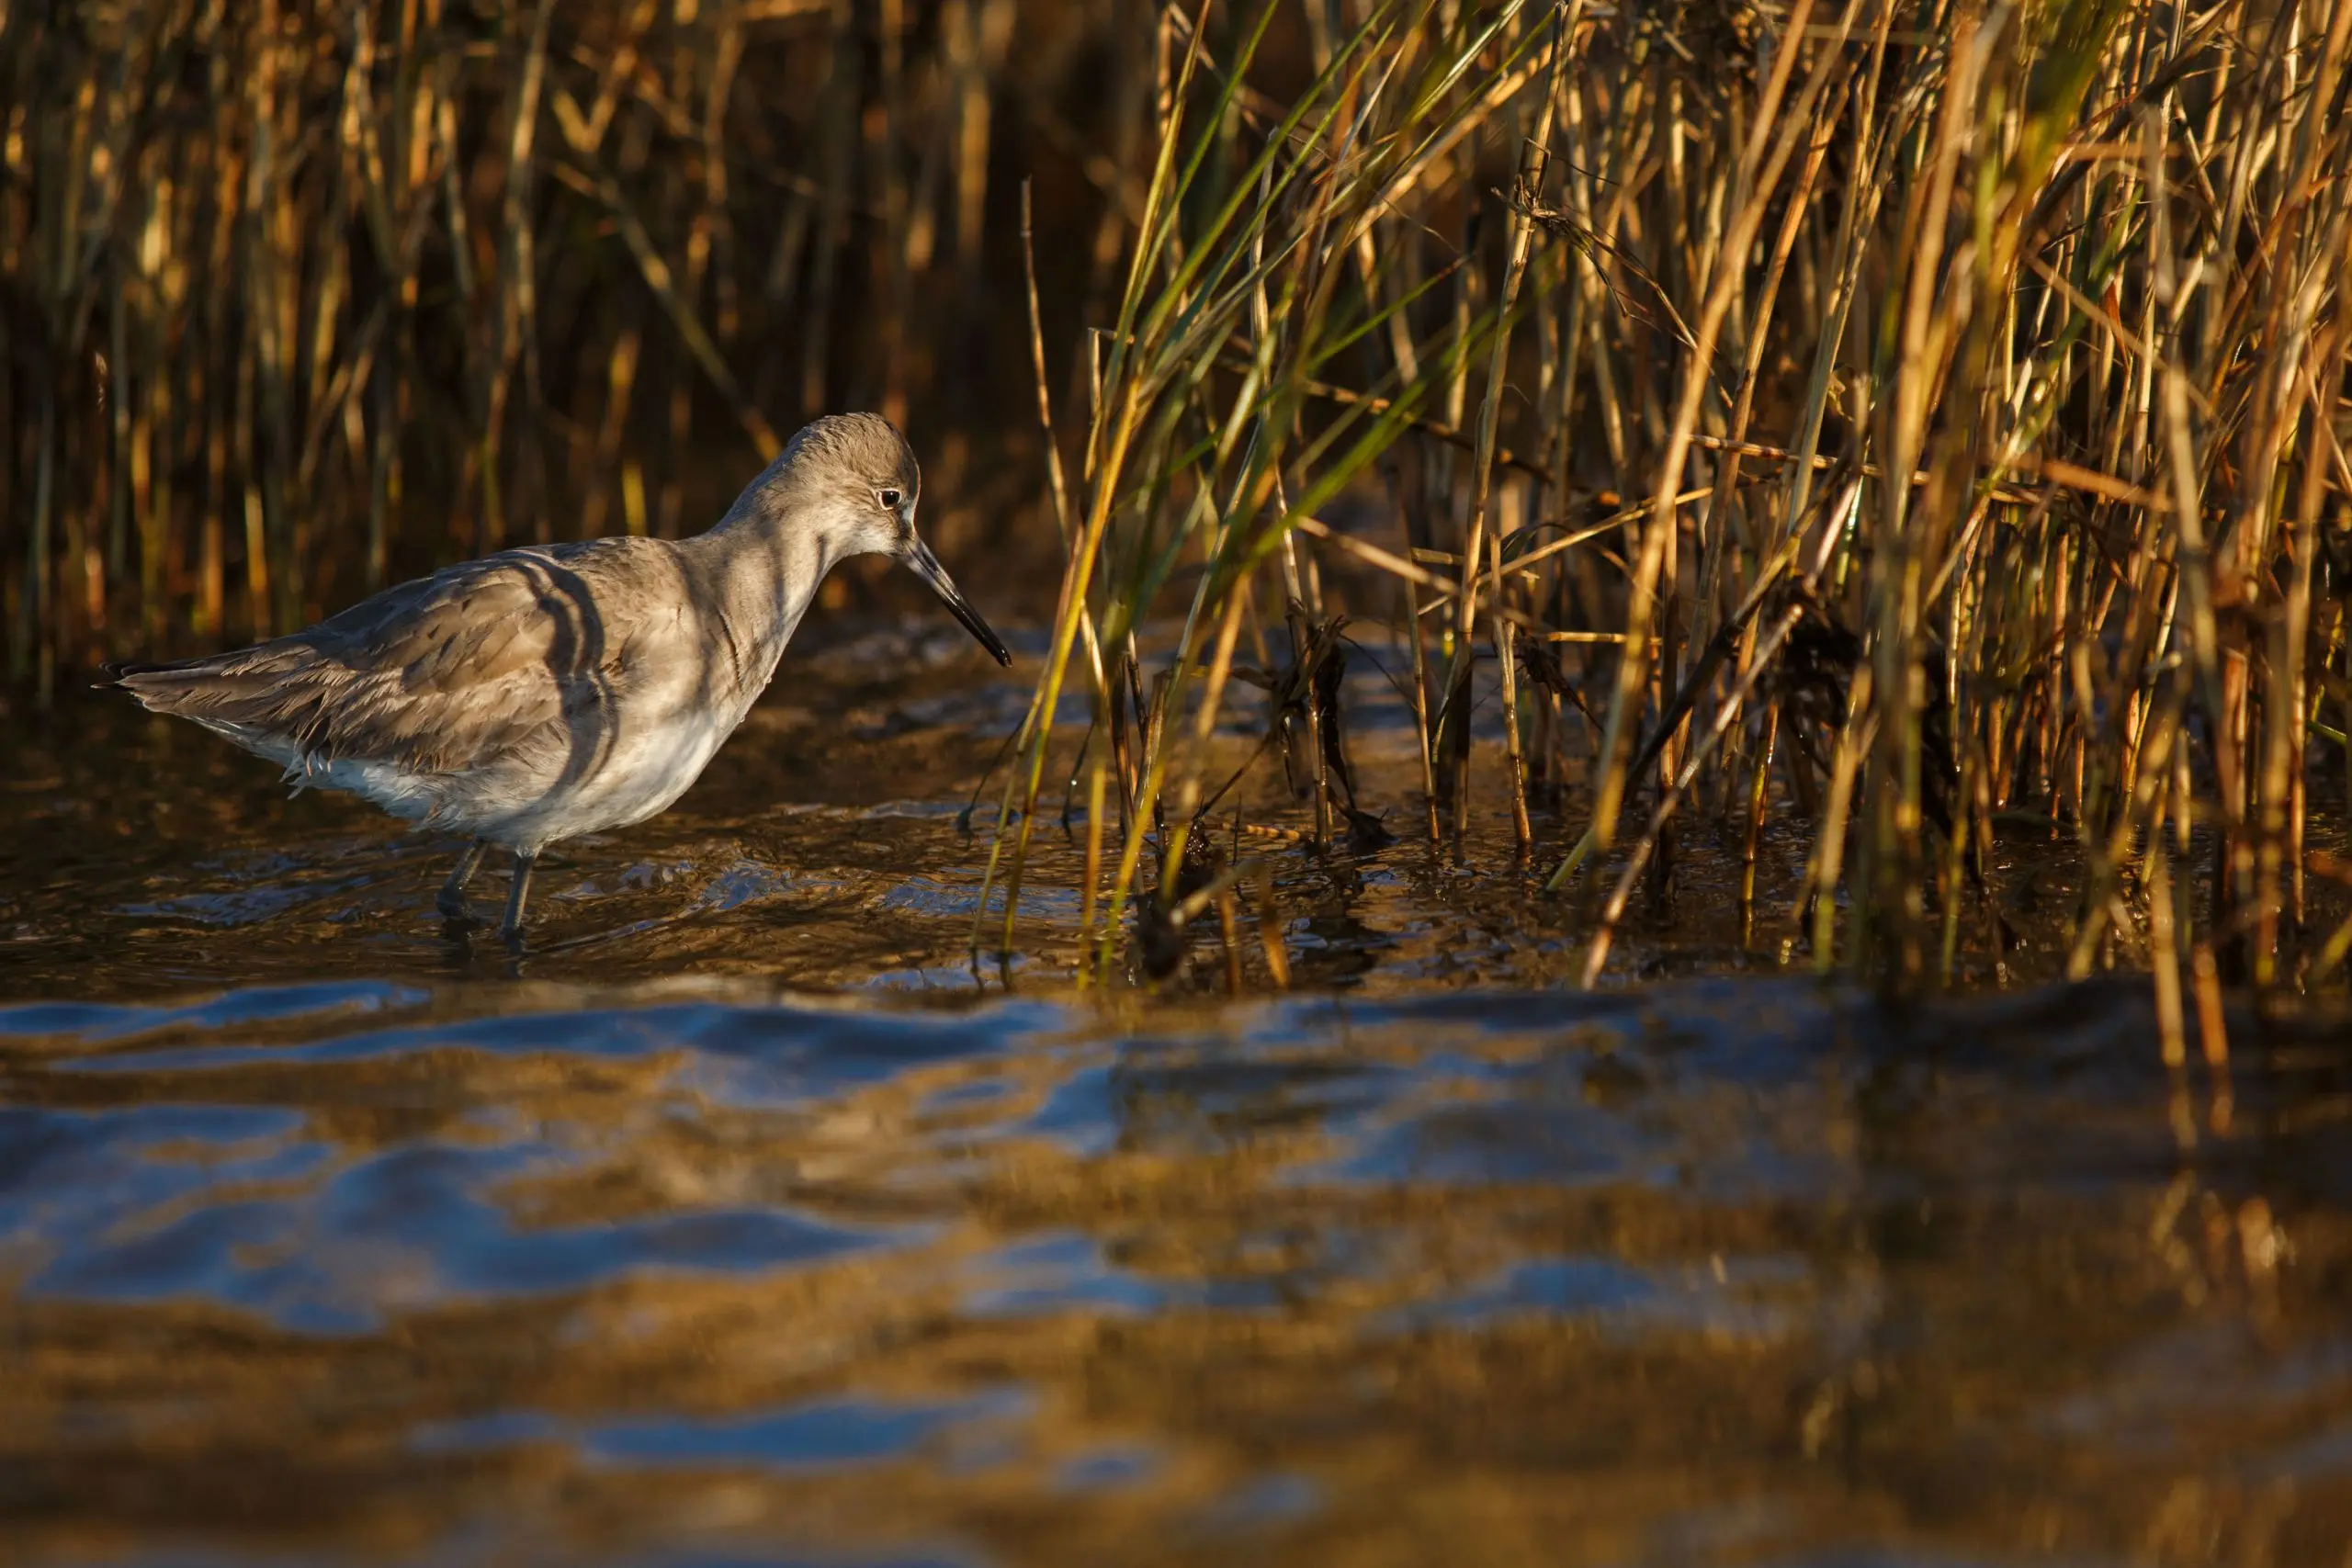 A species of sandpiper known as a Willet (Tringa semipalmata) searches for prey in the balding marsh grass at the edge of the cemetery